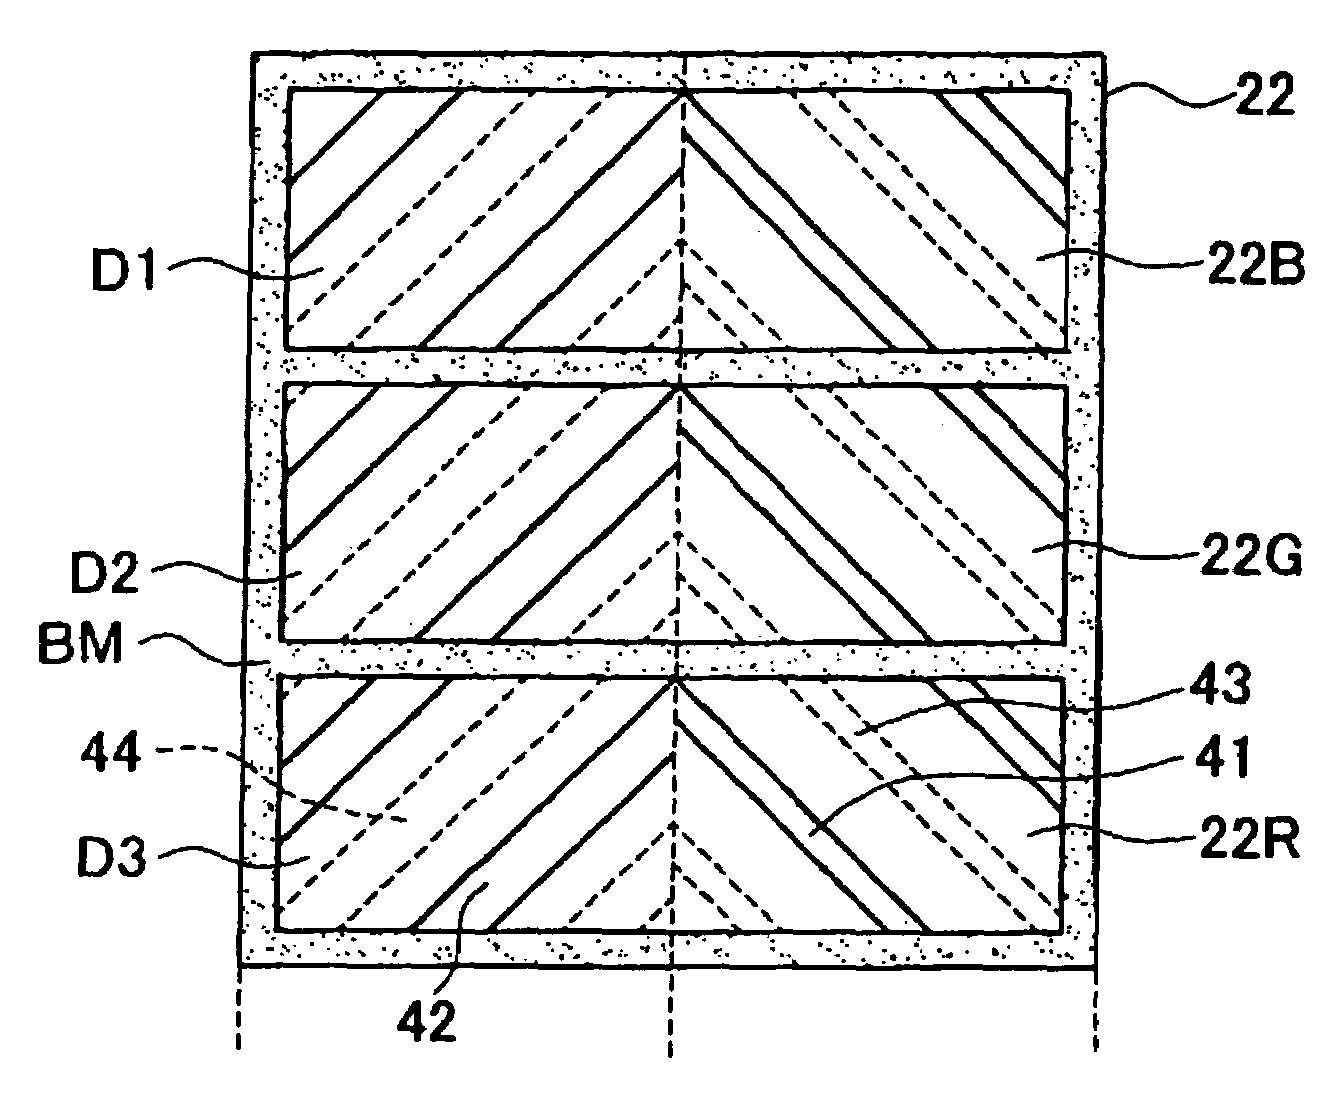 Liquid crystal display device having particular alignment controlling elements in transmissive and reflective pixel regions